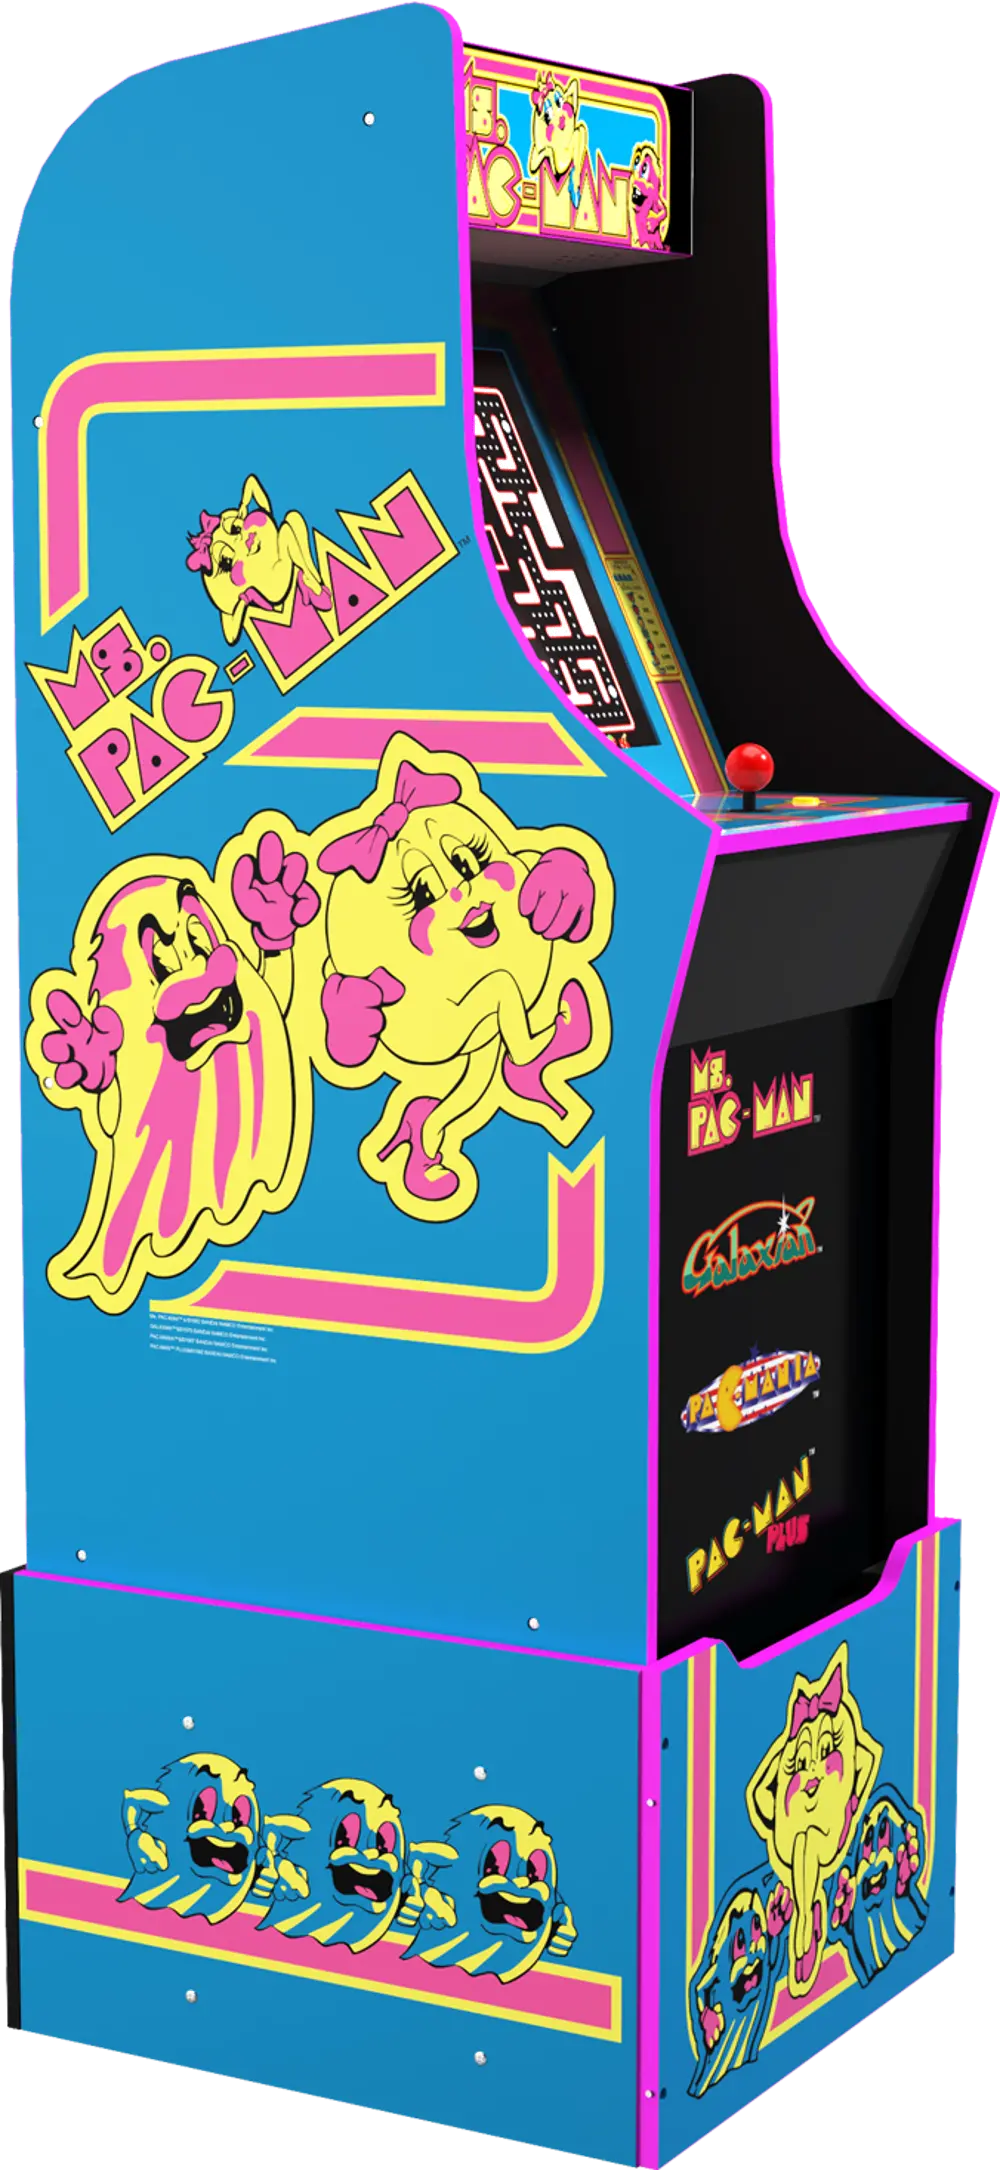 ARCADE1UP/MS_PACMAN Arcade1Up Ms. Pac-Man Arcade with Riser-1